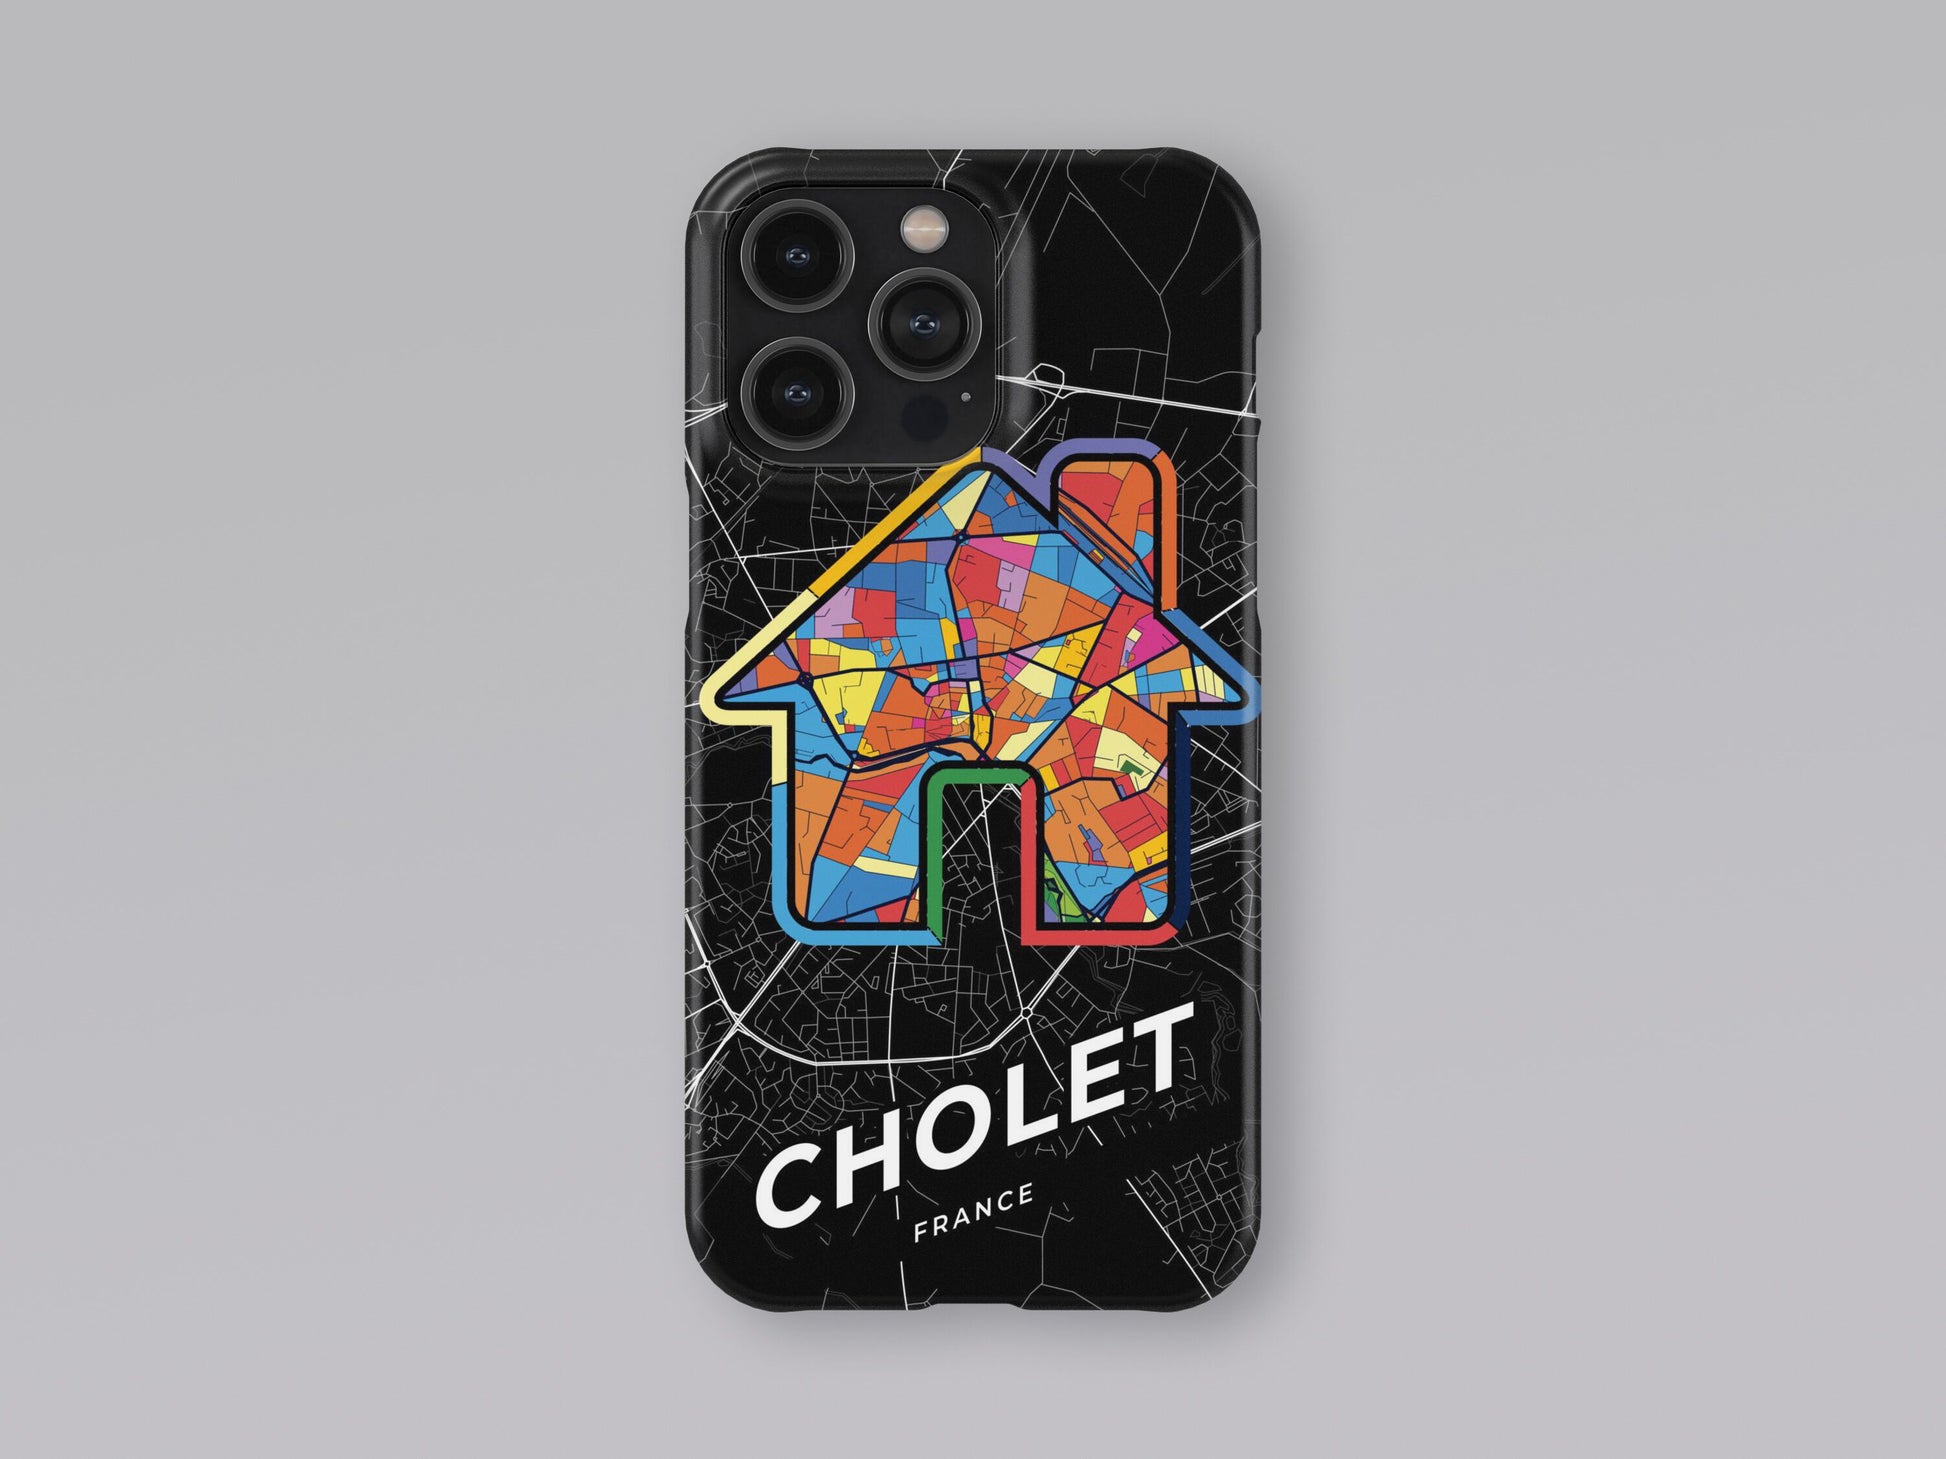 Cholet France slim phone case with colorful icon. Birthday, wedding or housewarming gift. Couple match cases. 3